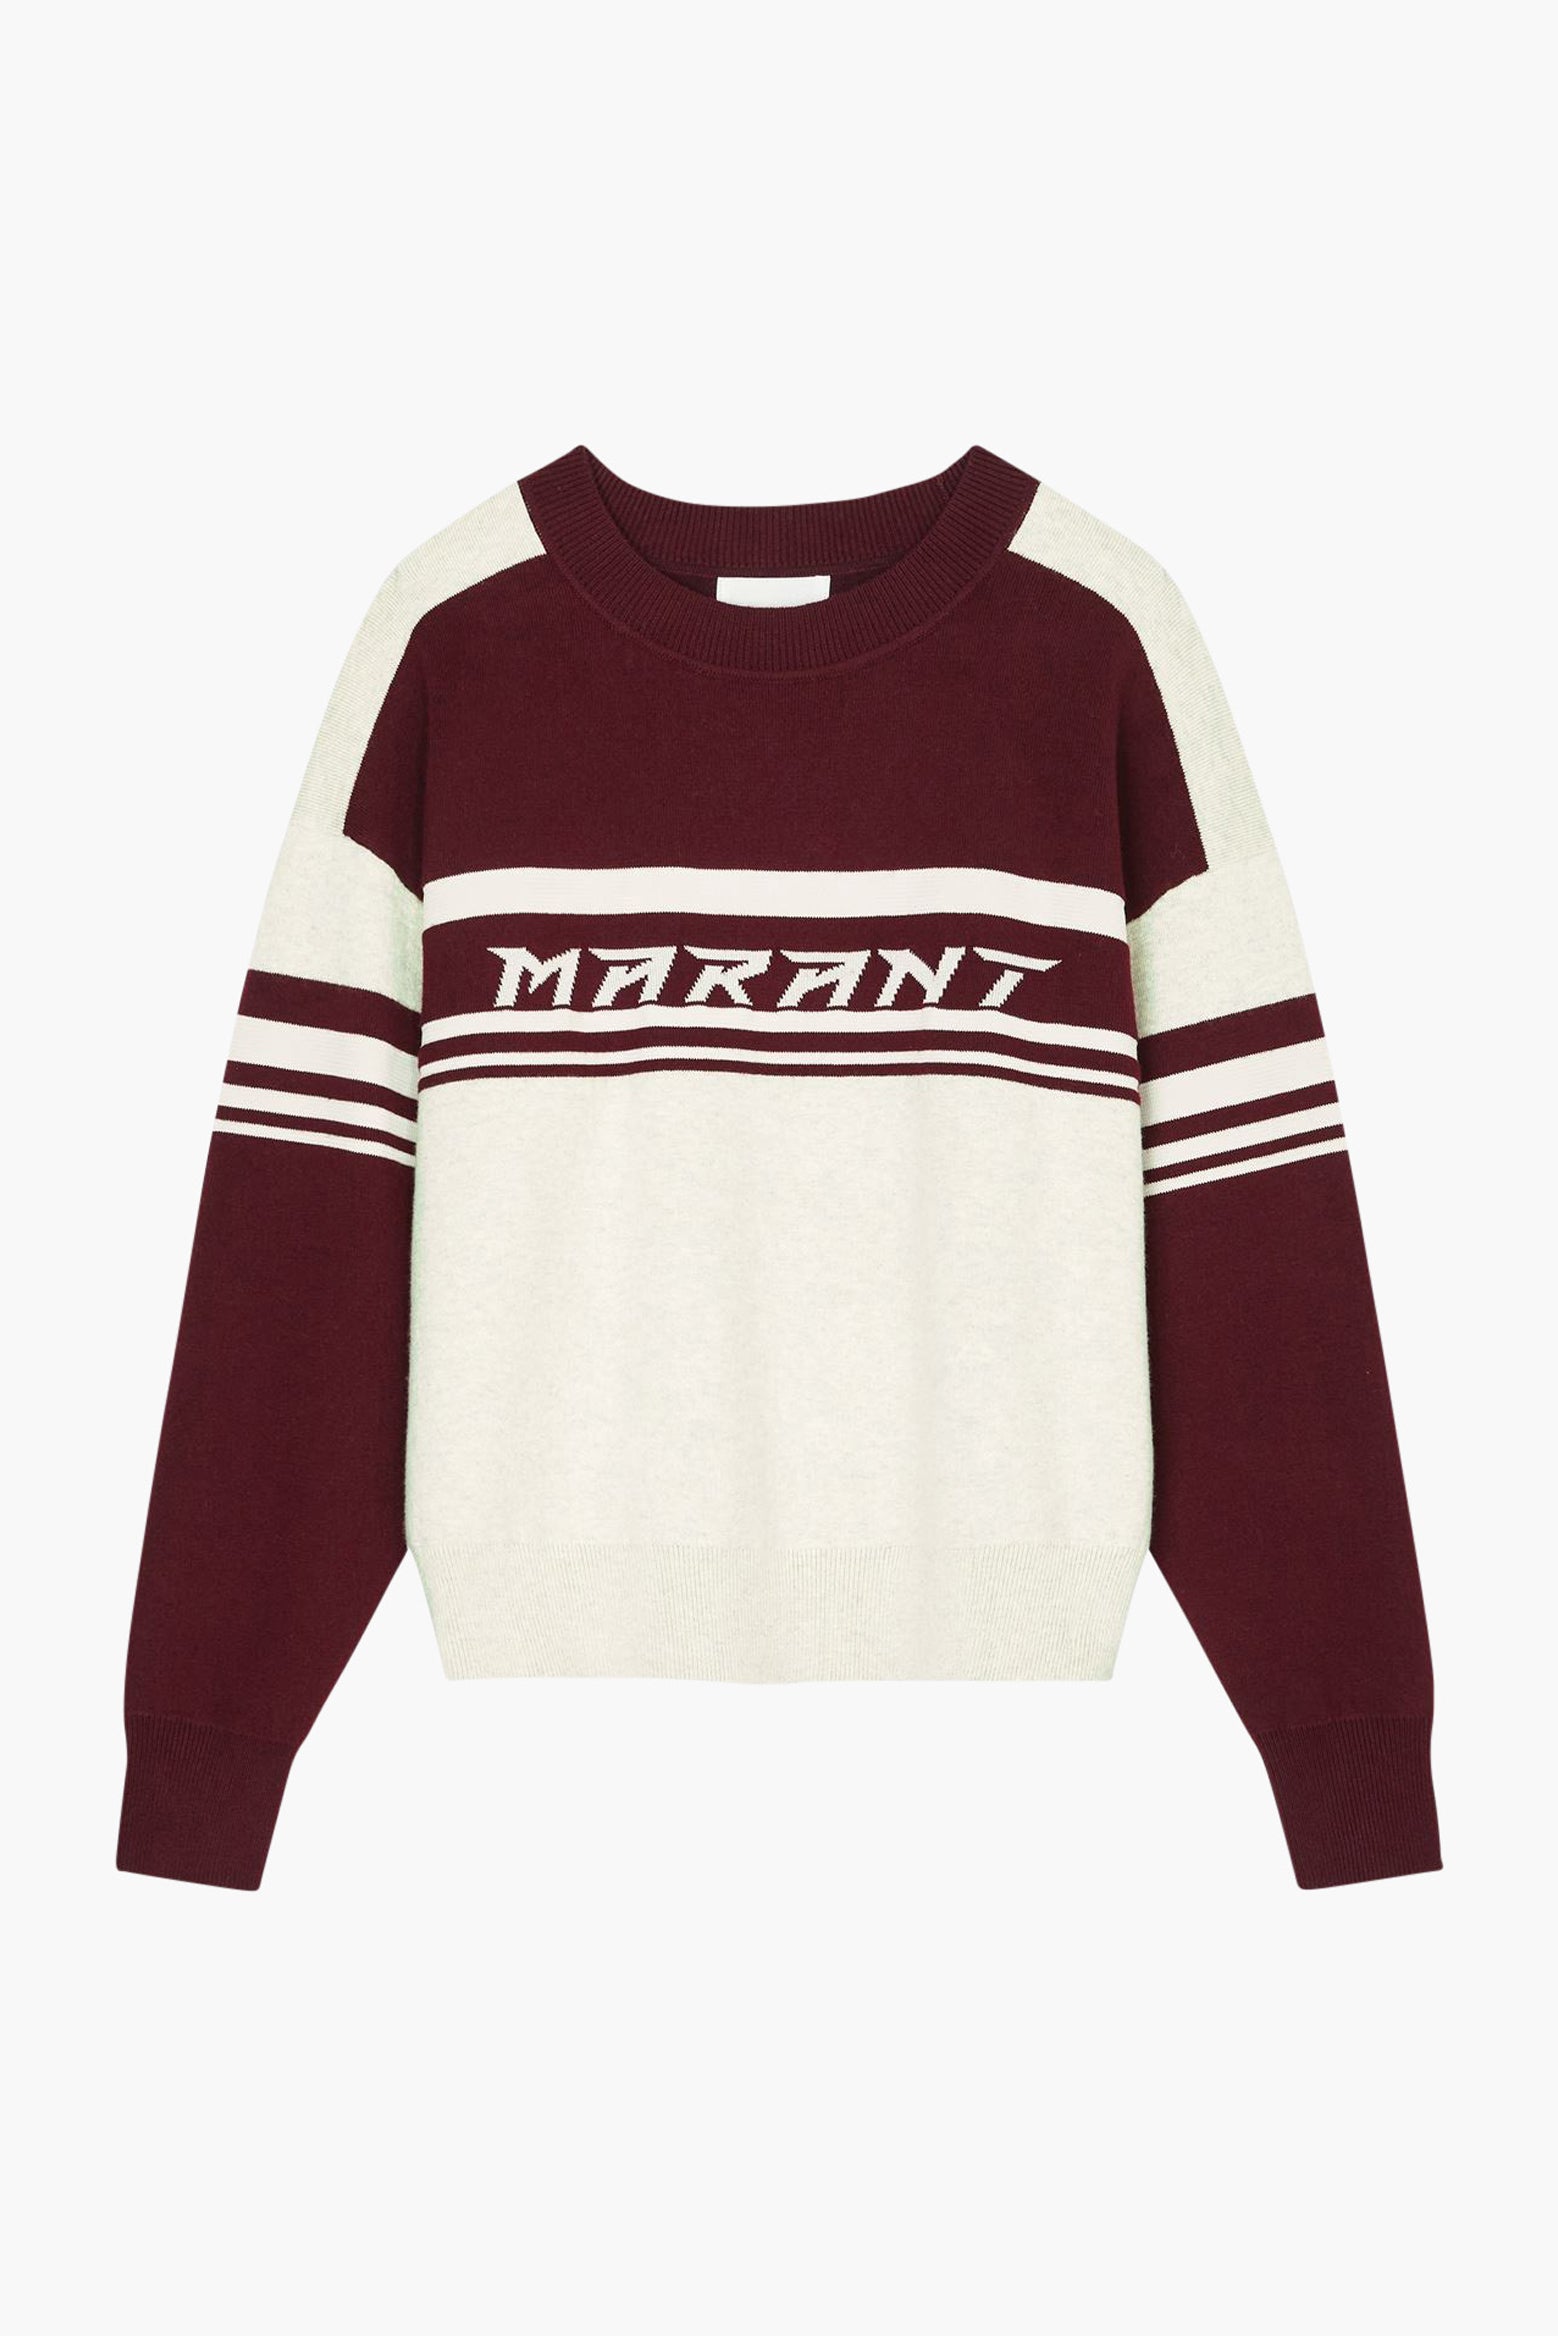 The Isabel Marant Callie Pullover in Dark Plum available at The New Trend Australia